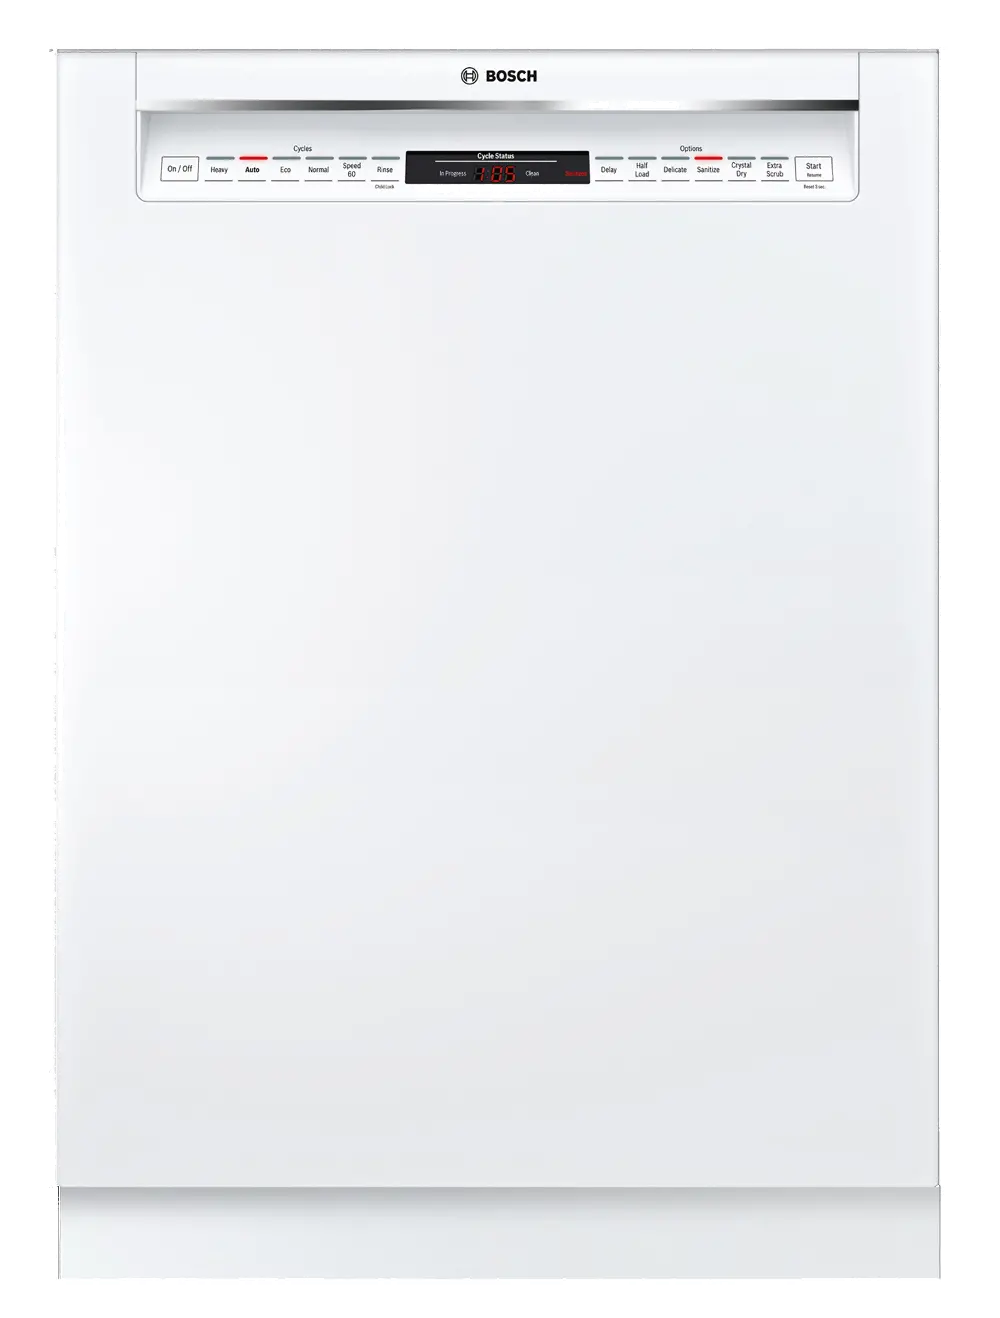 SHE878ZD2N Bosch 800 Series Dishwasher with CrystalDry and Front Controls - White-1